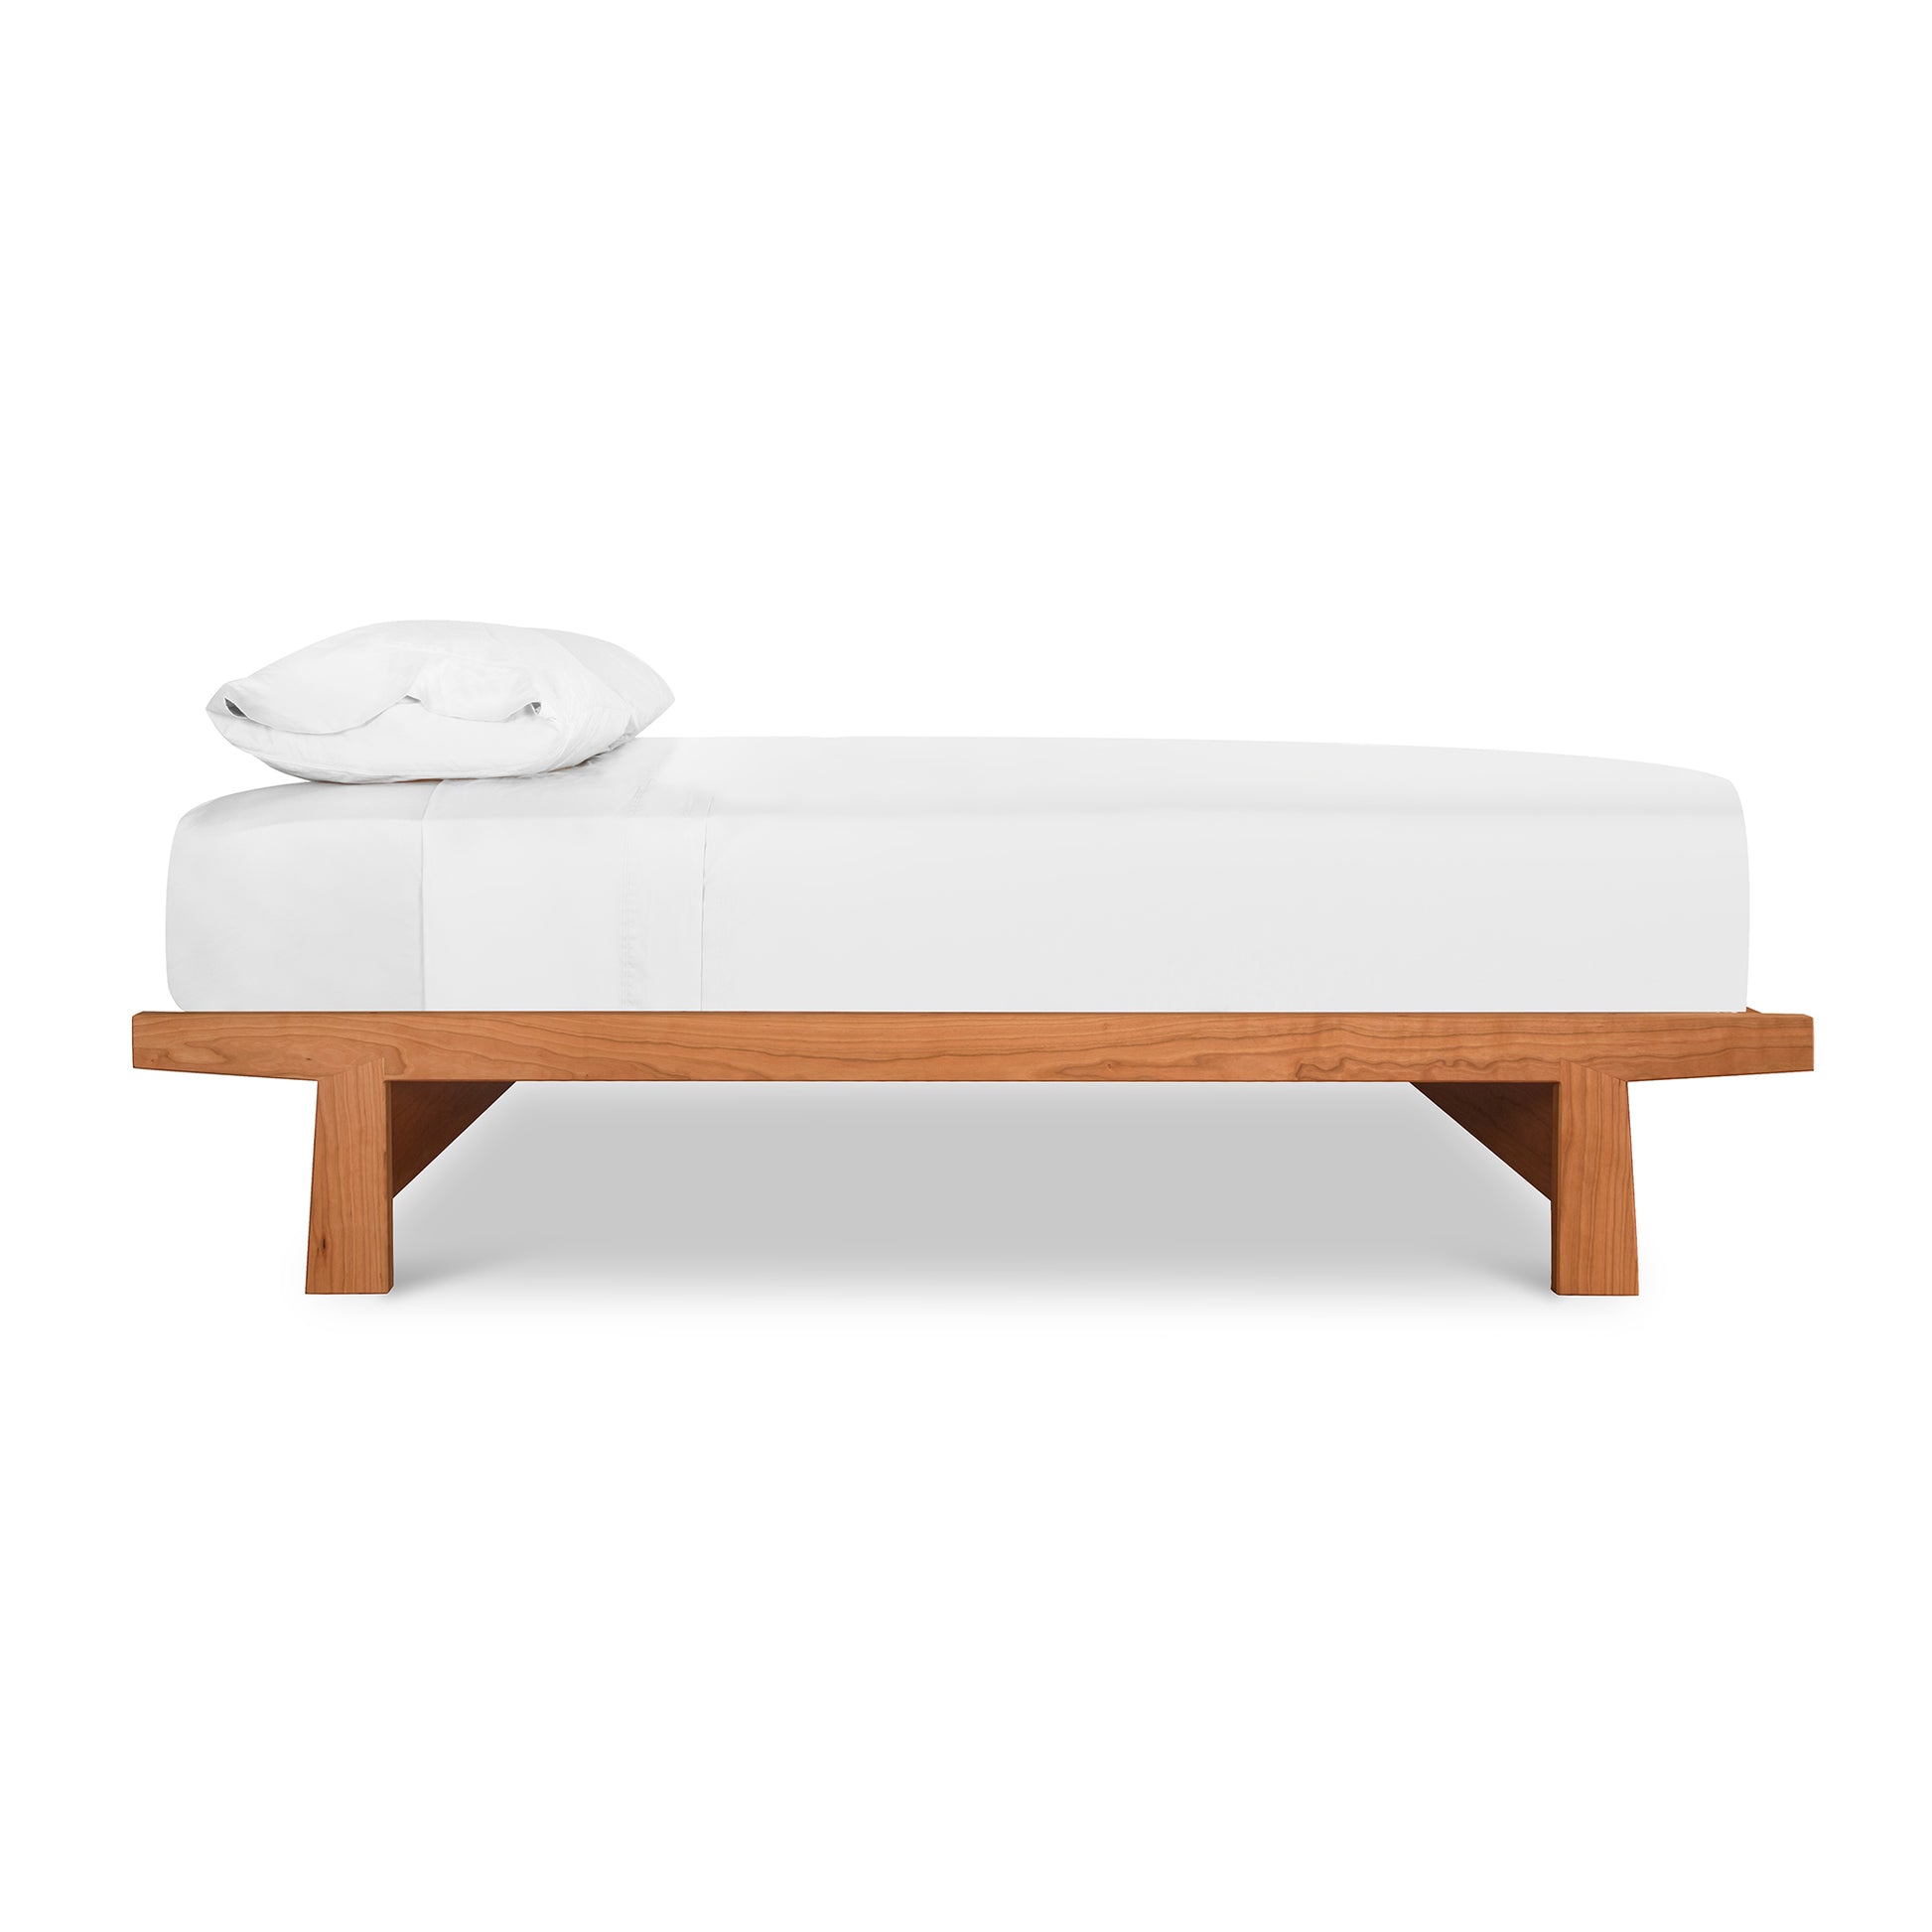 Alt: Cherry Moon Dovetail Platform Bed by Maple Corner Woodworks - minimalist solid cherry wood bed frame with eco-friendly oil finish, sustainably harvested hardwood, white linens – Vermont made American furniture.